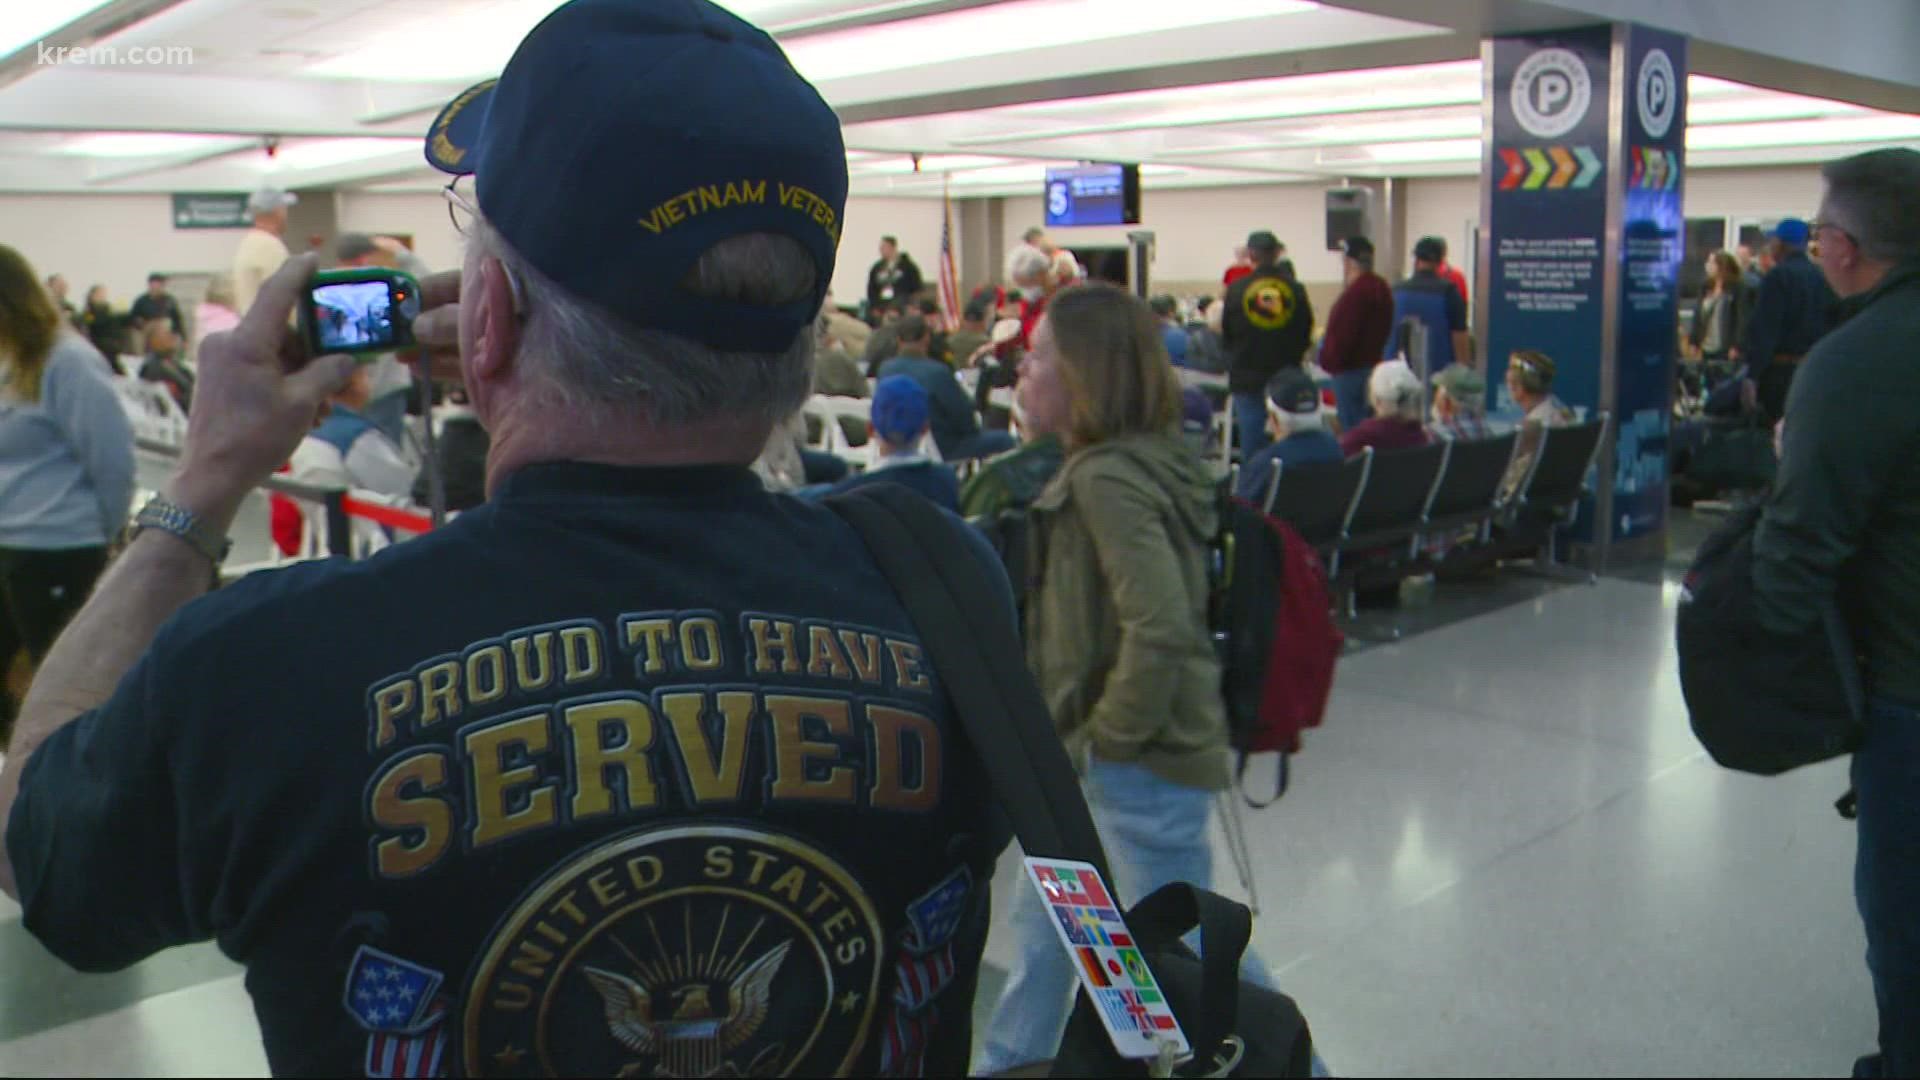 The veterans were escorted to Washington, D.C. to visit war memorials built in their honor as part of this year's Honor Flight.